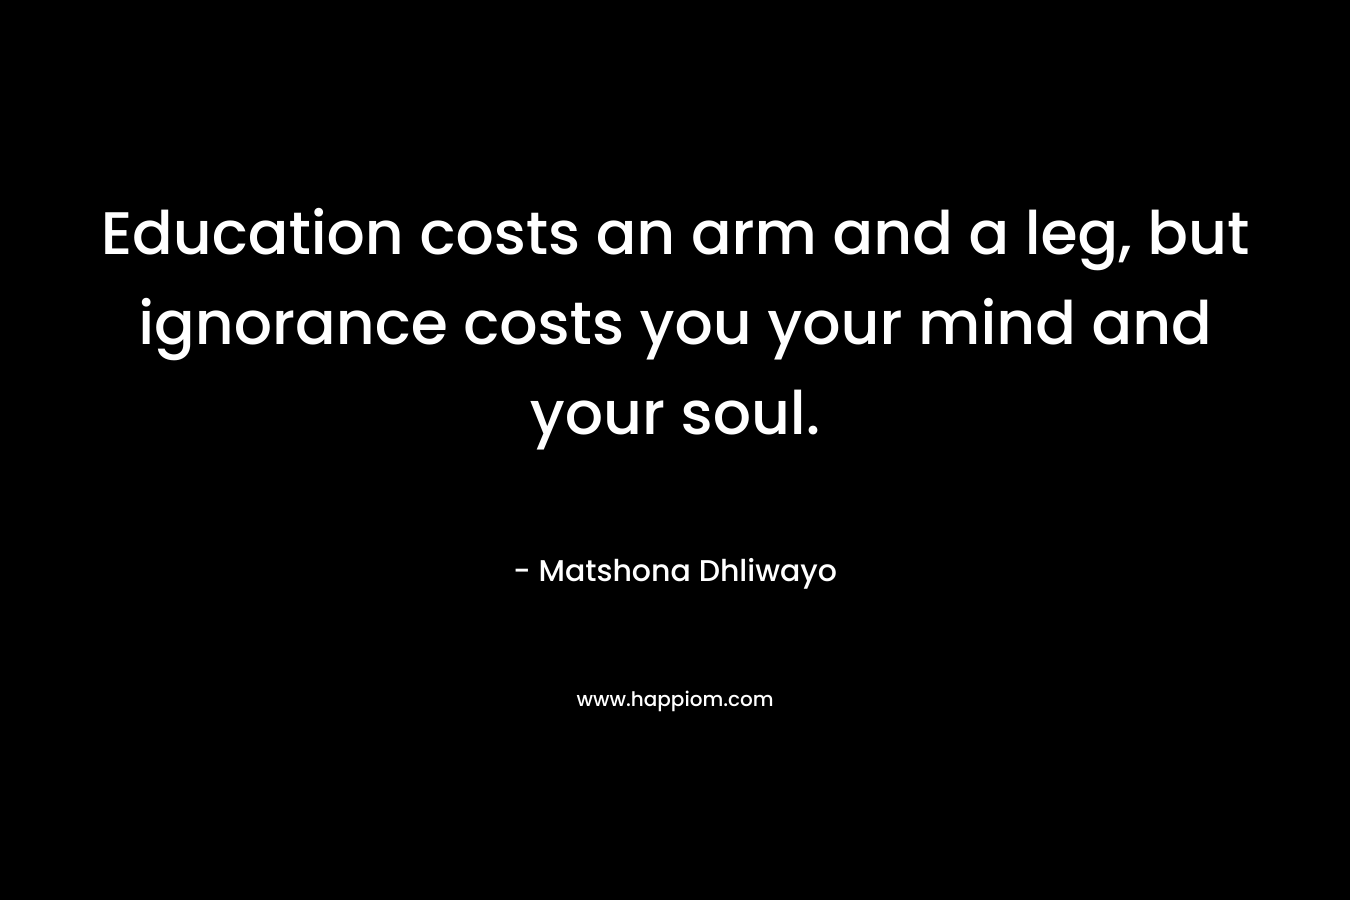 Education costs an arm and a leg, but ignorance costs you your mind and your soul. – Matshona Dhliwayo